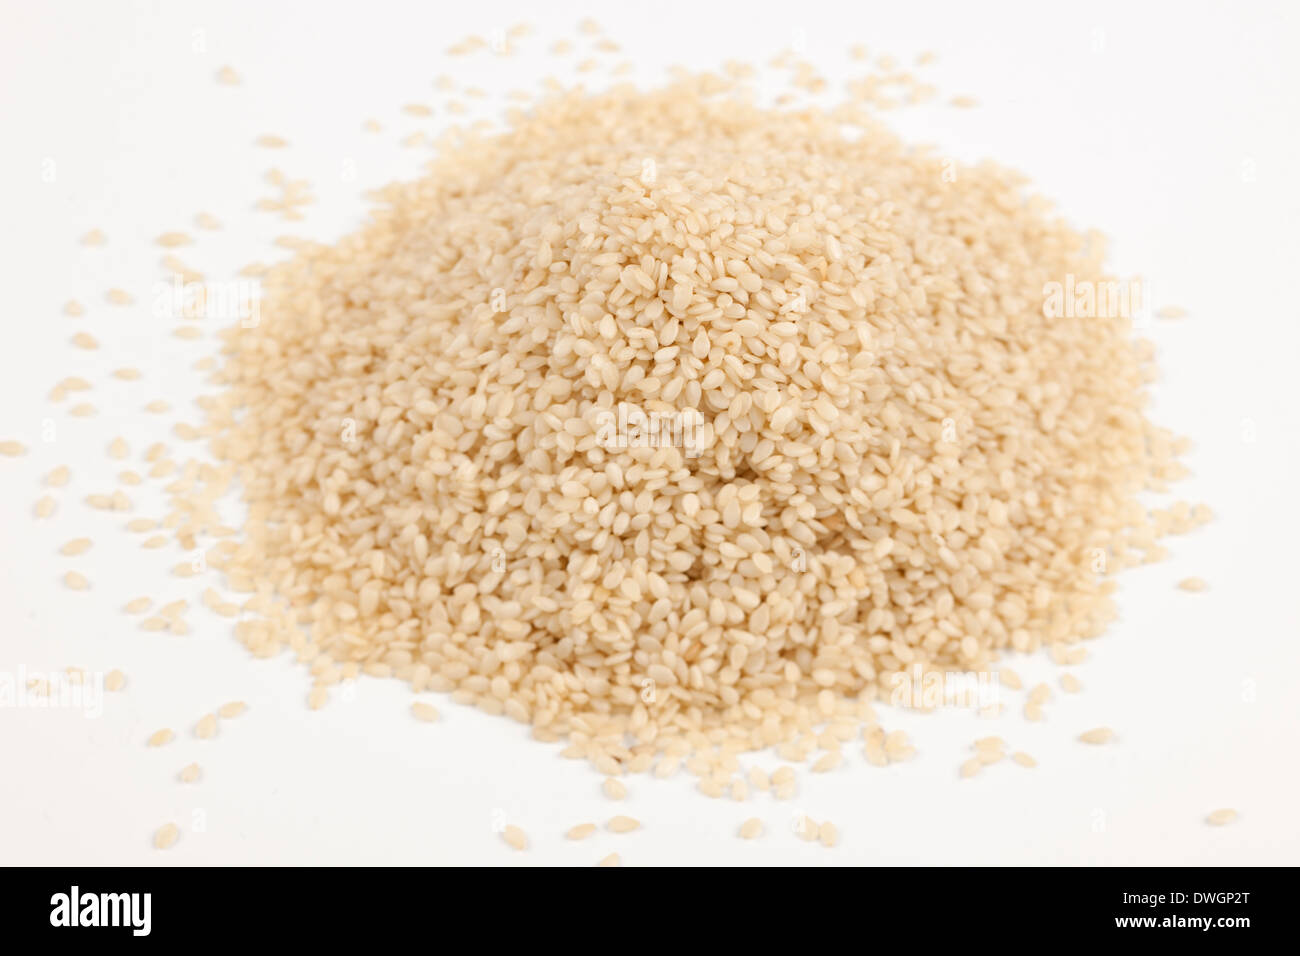 Pile of hulled Sesame seeds Stock Photo